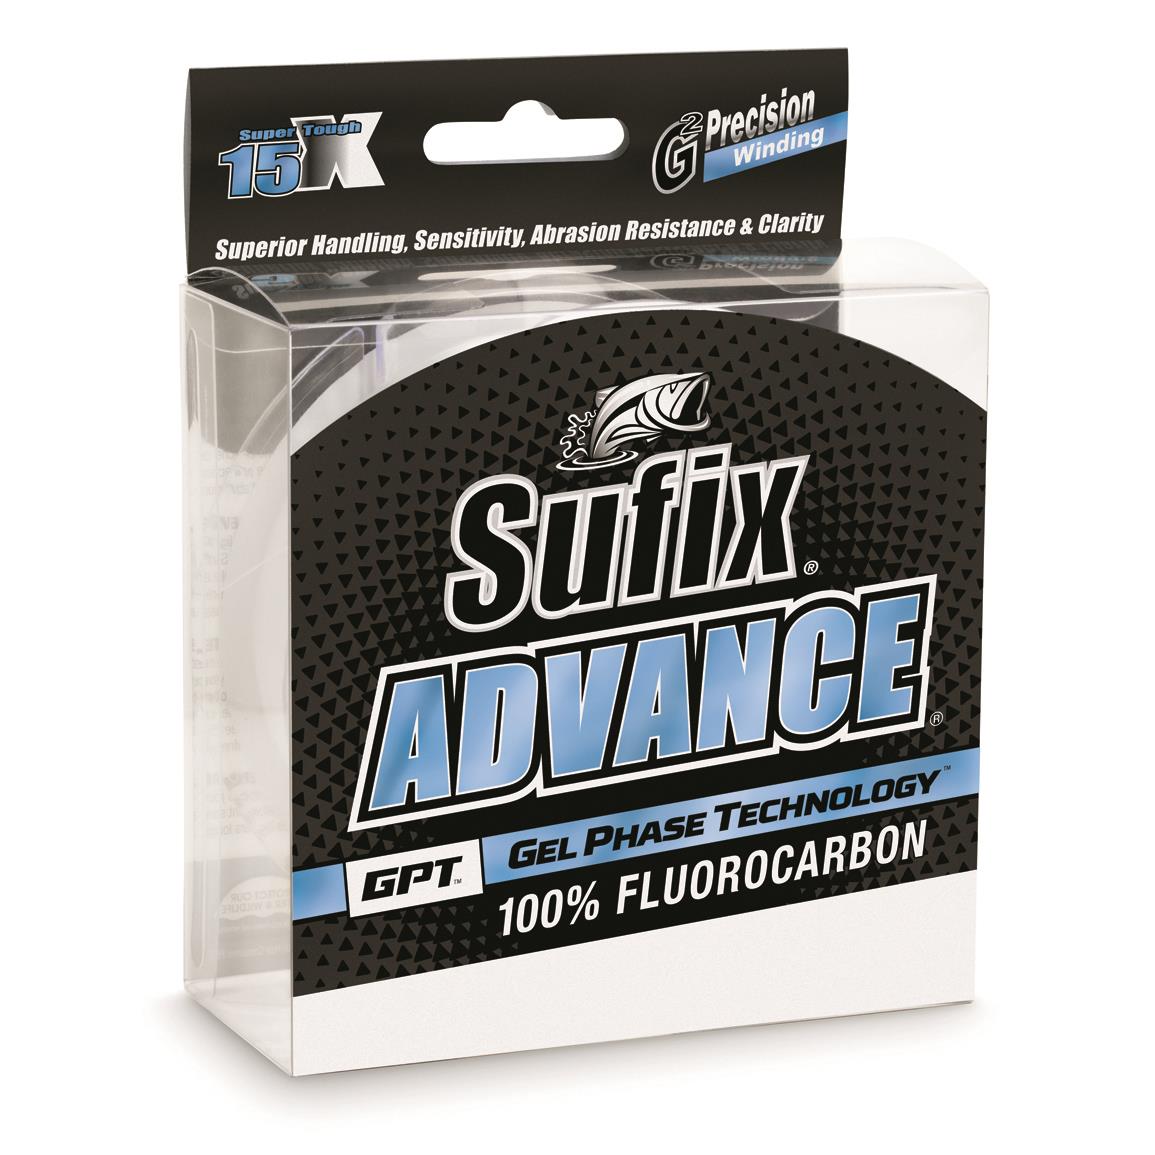 Seaguar InvizX Fluorocarbon Fishing Line, 200 Yards - 722685, Fishing Line  at Sportsman's Guide